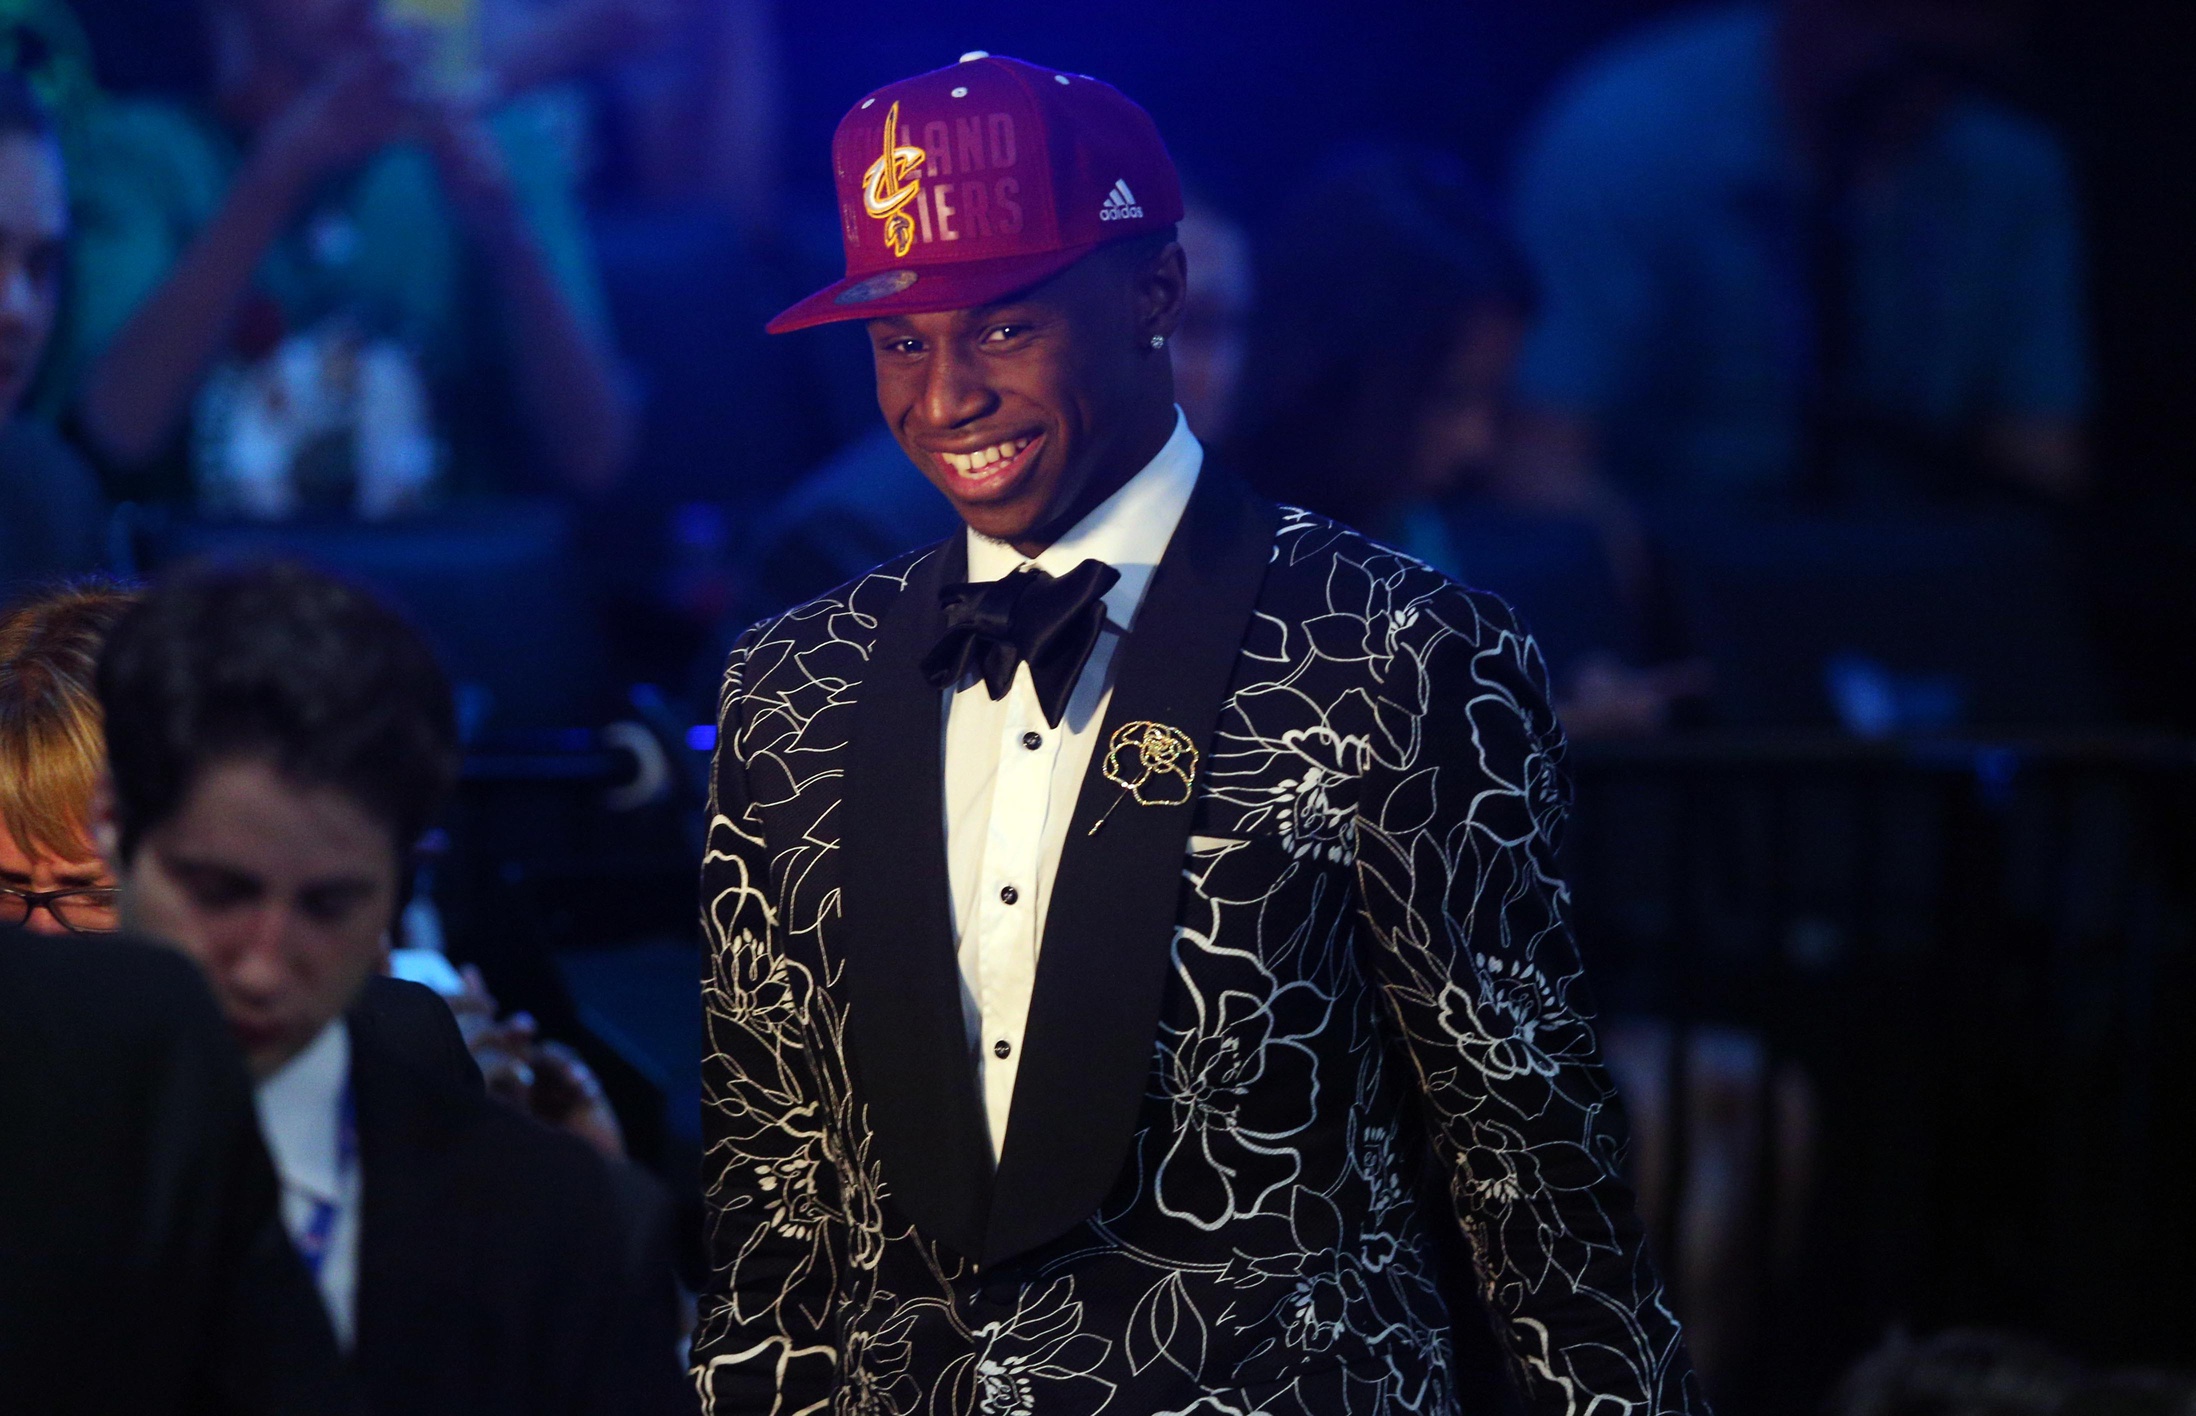 Best fashion at the NBA Draft